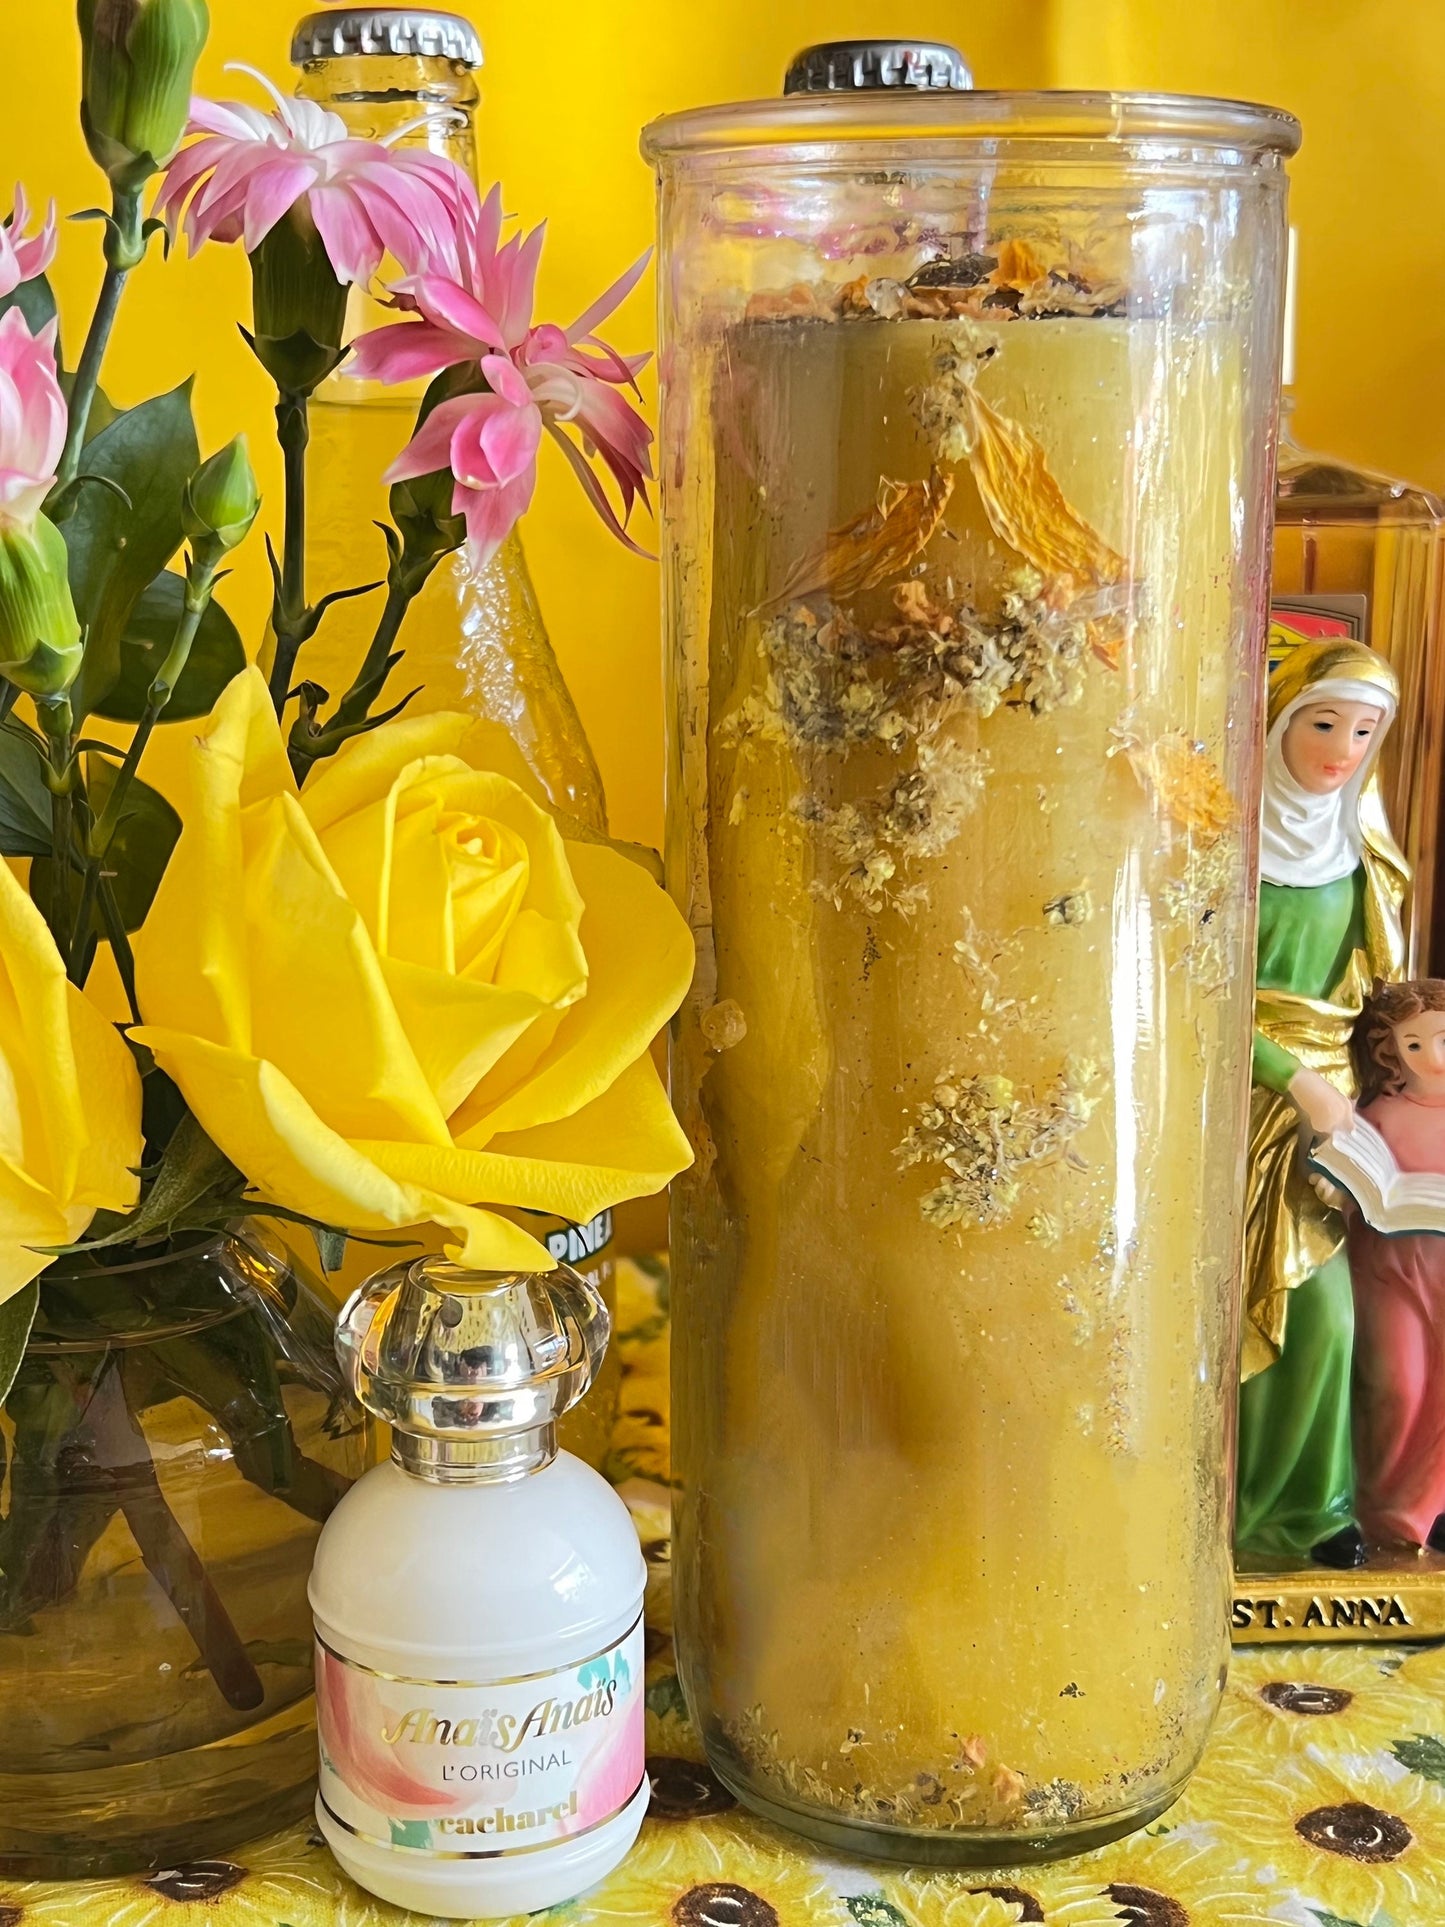 Anaisa Pye Hand Carved Candle + Passion & Seduction + 24K Gold + Saint Anne + Anaisa Pie